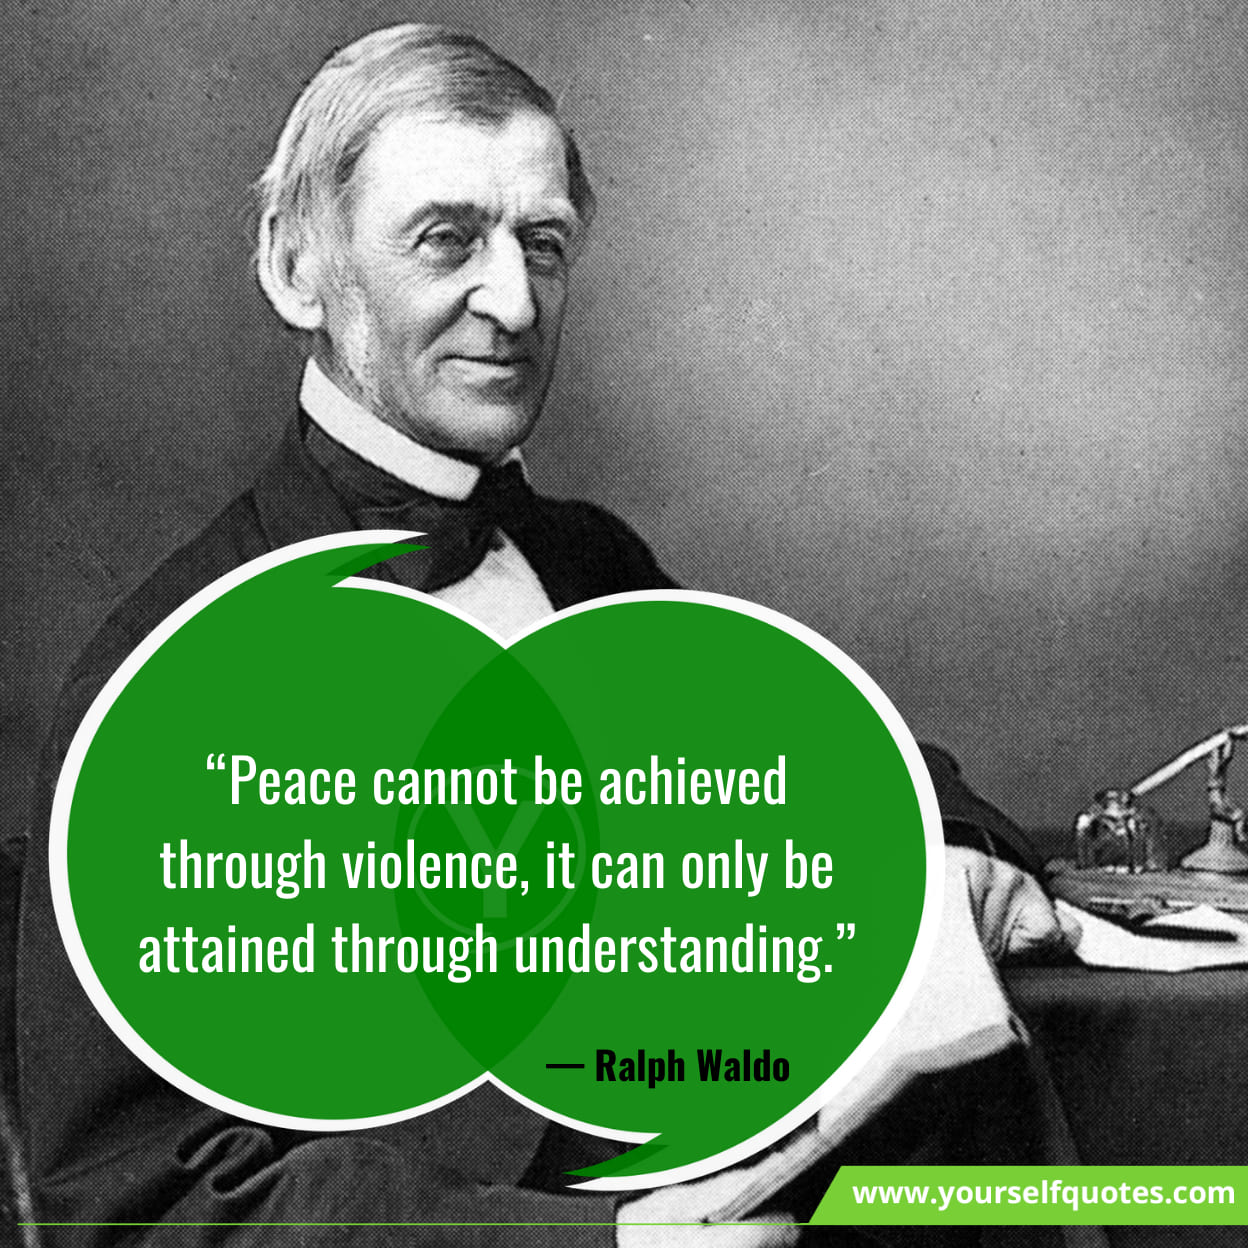 Best Famous Quotes About Peace